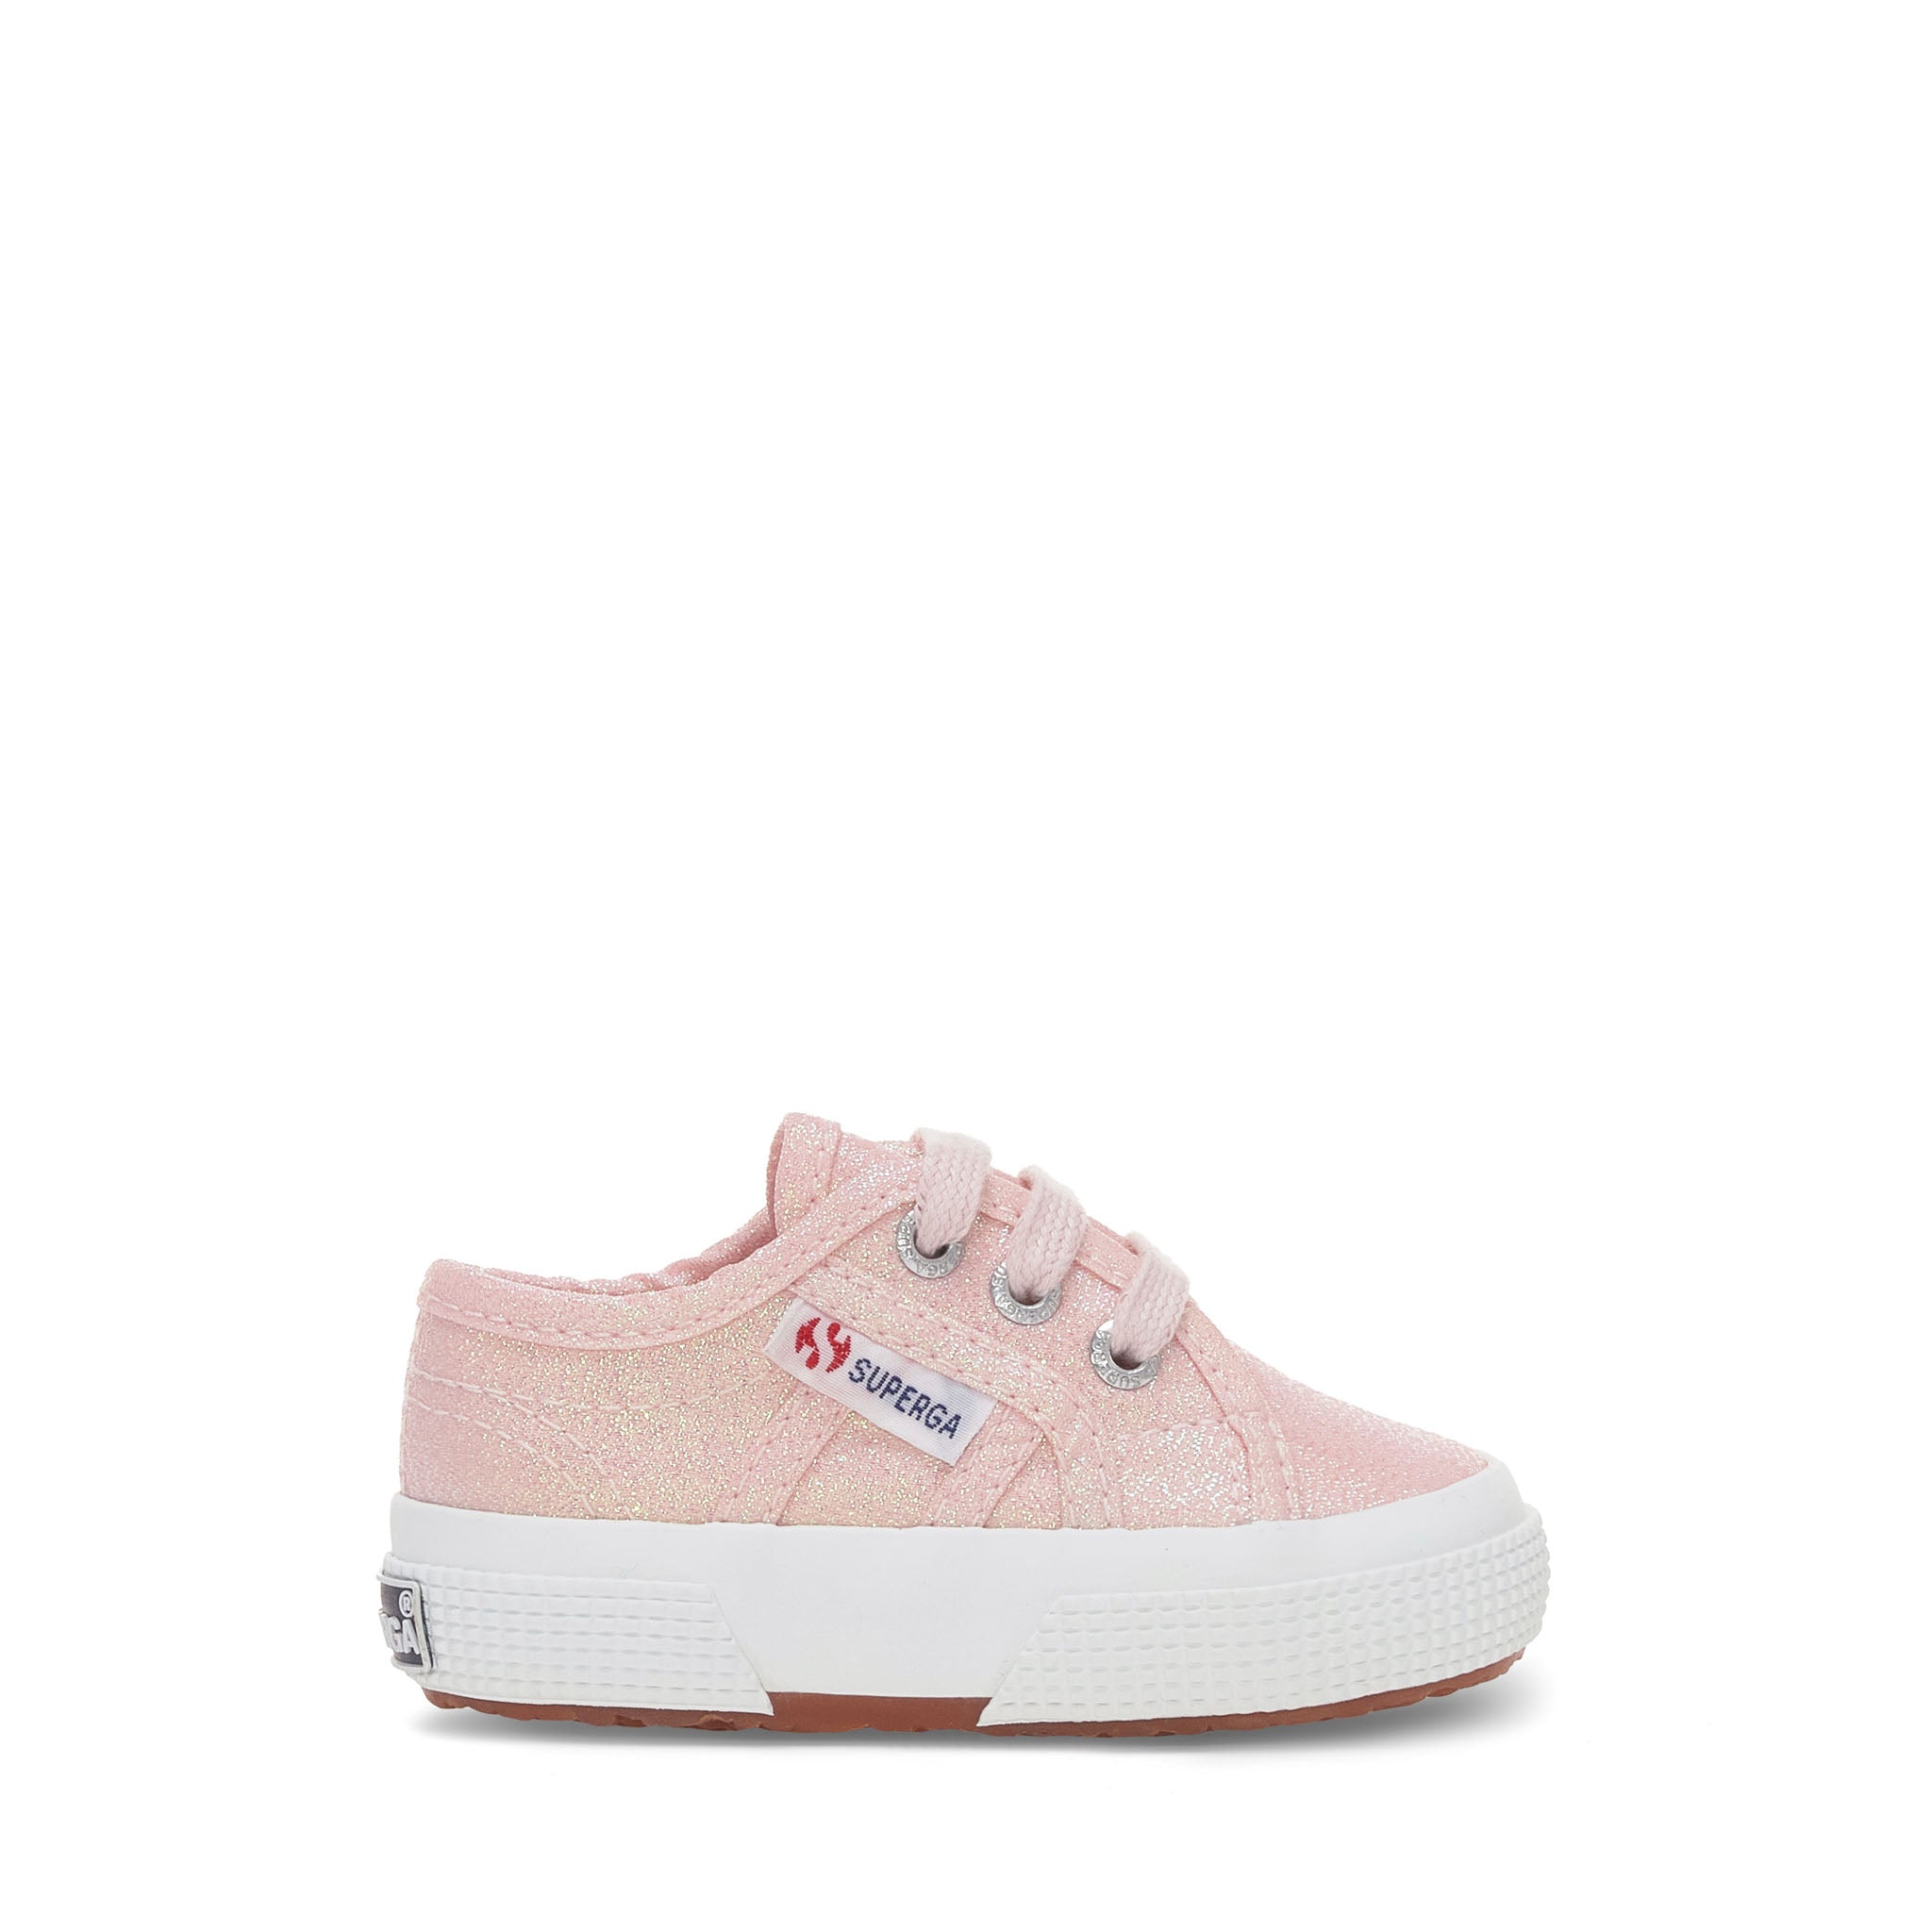 Superga 2750 Baby Lam√© Sneakers - Pinkish Iridescent. Side view.